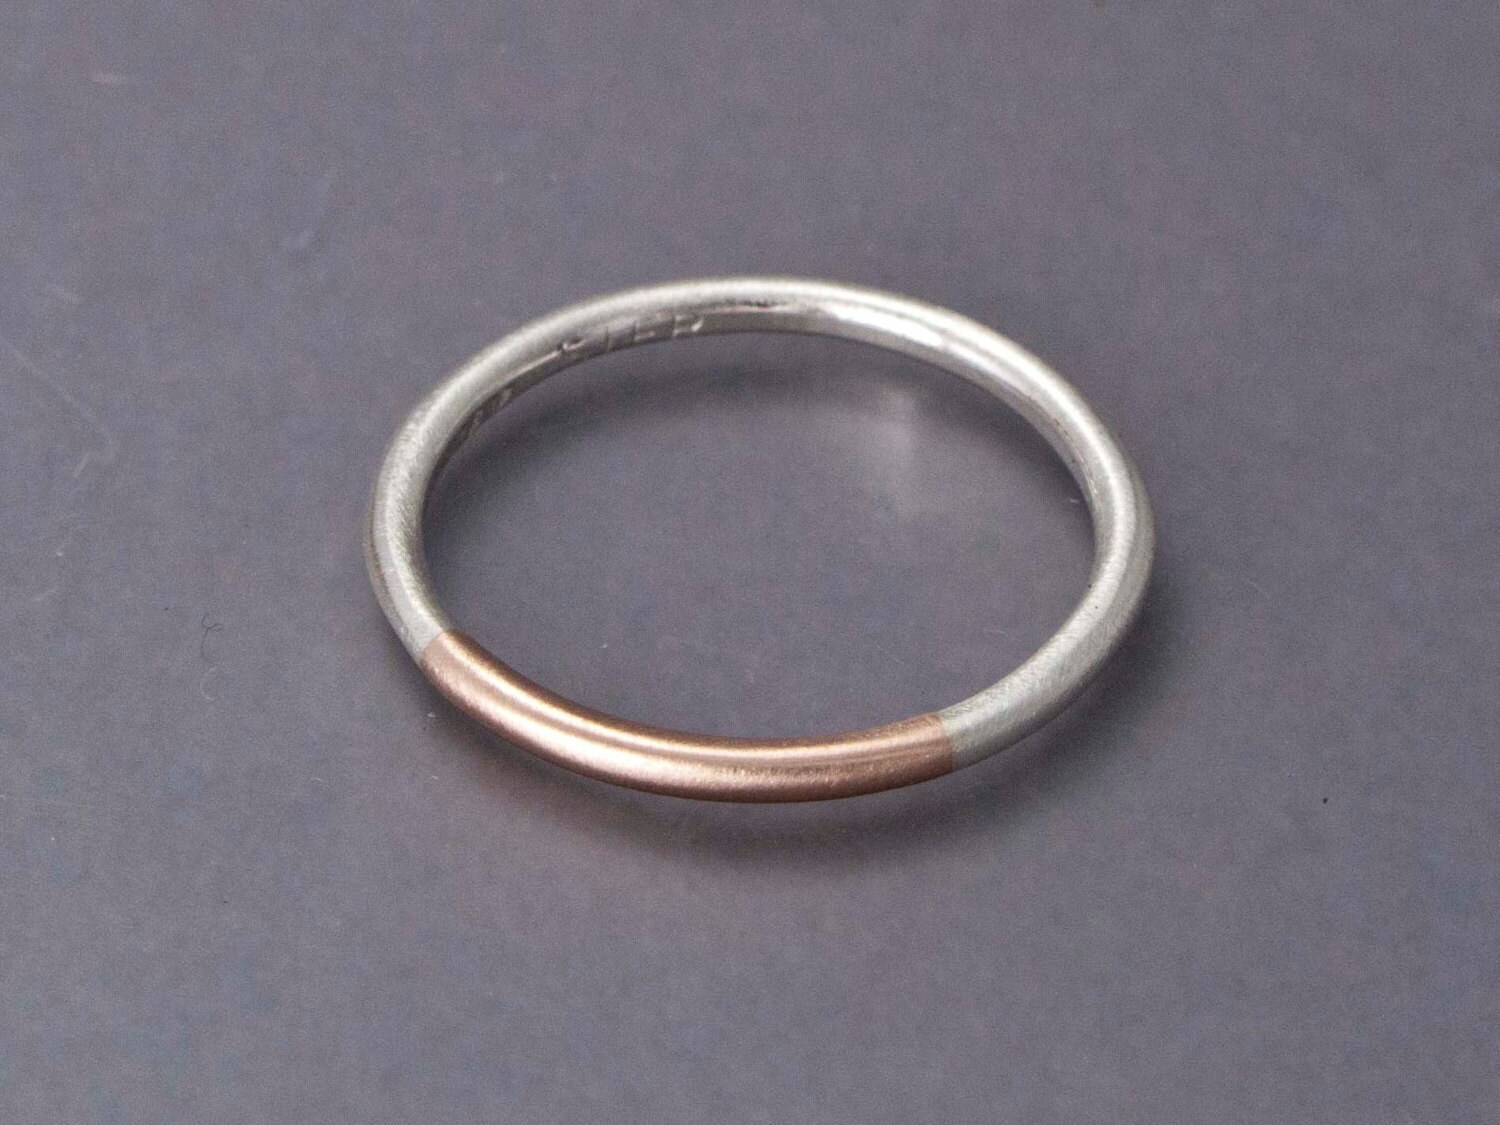 Mixed 14k Gold and Silver 1.6mm Round Ring Married Two Tone - Etsy